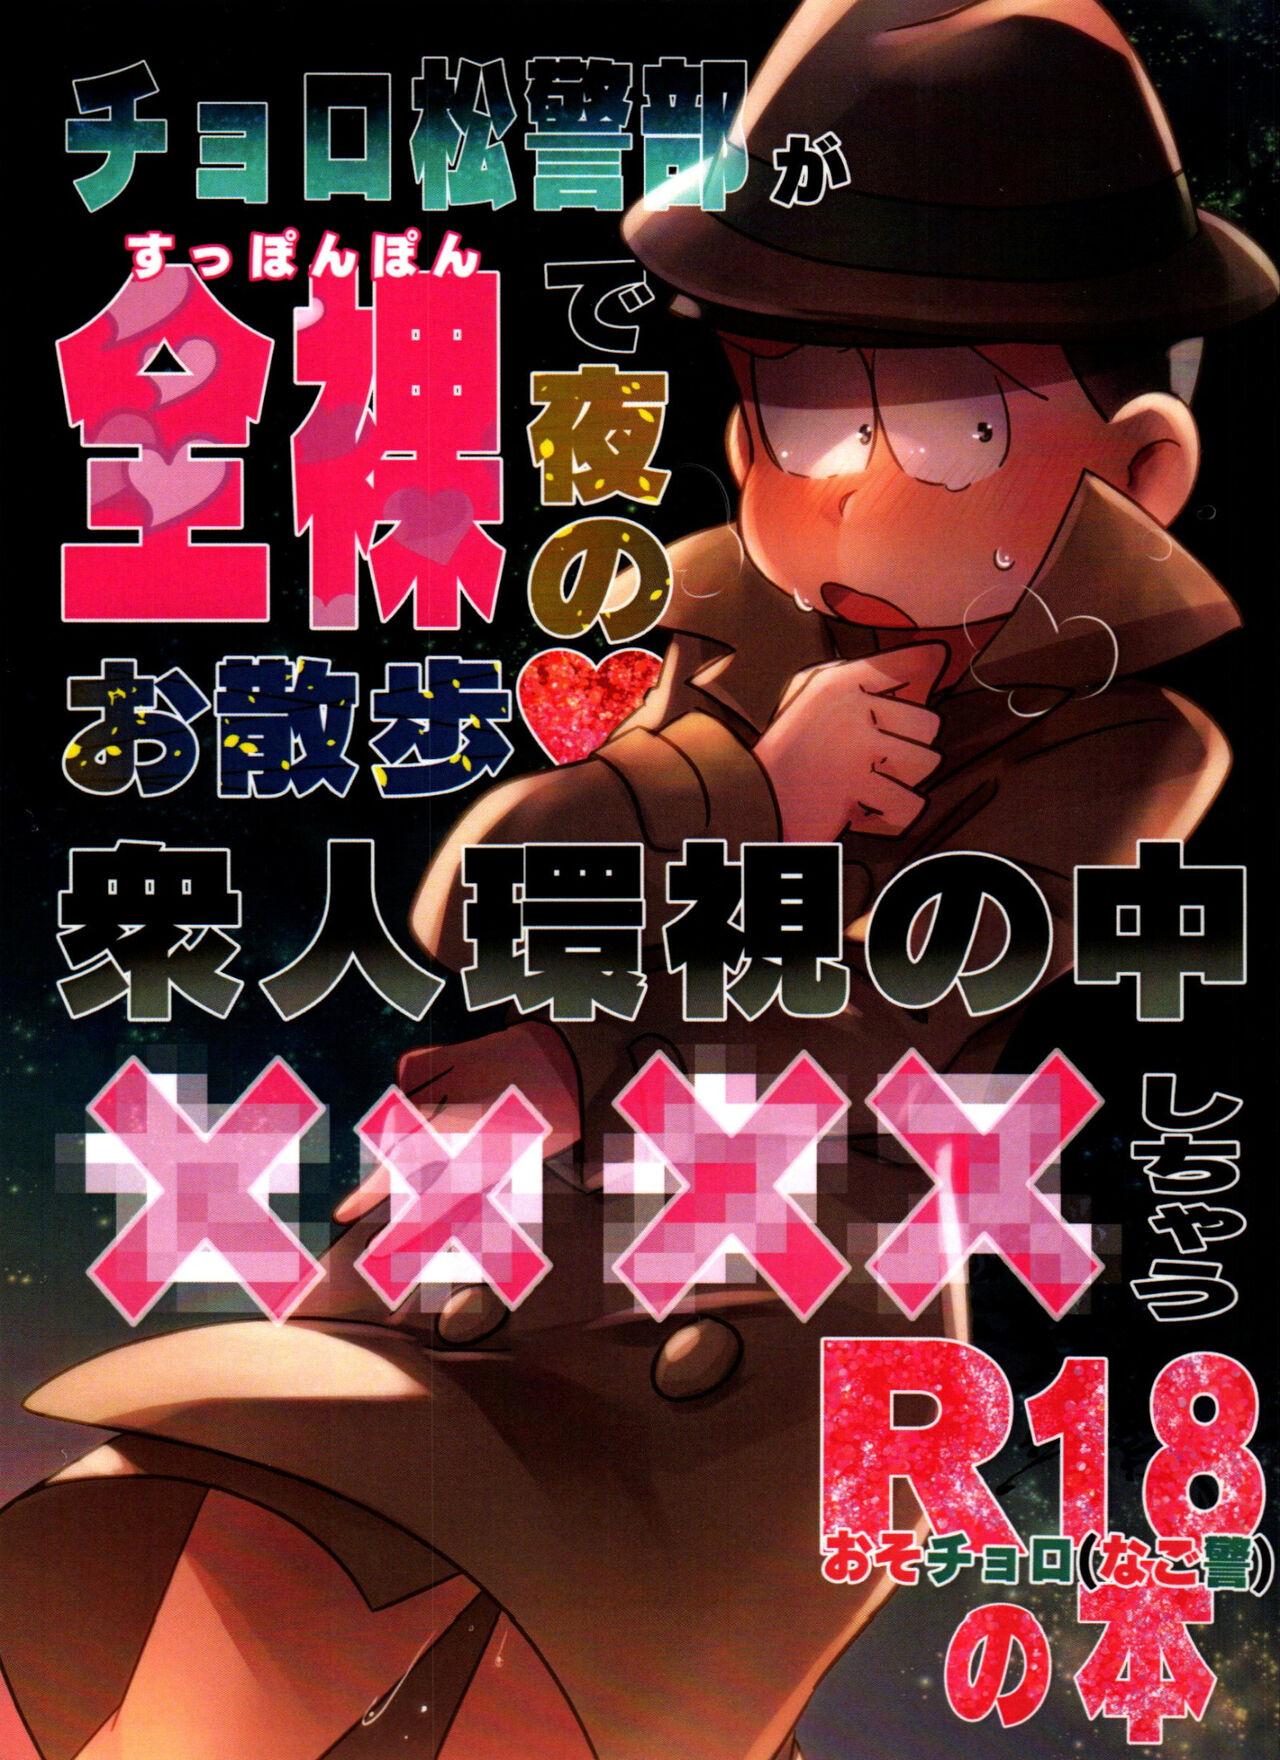 Adult Inspector Choromatsu walks naked at night and does XXX in the public eye R18 book - Osomatsu san Seduction Porn - Page 1